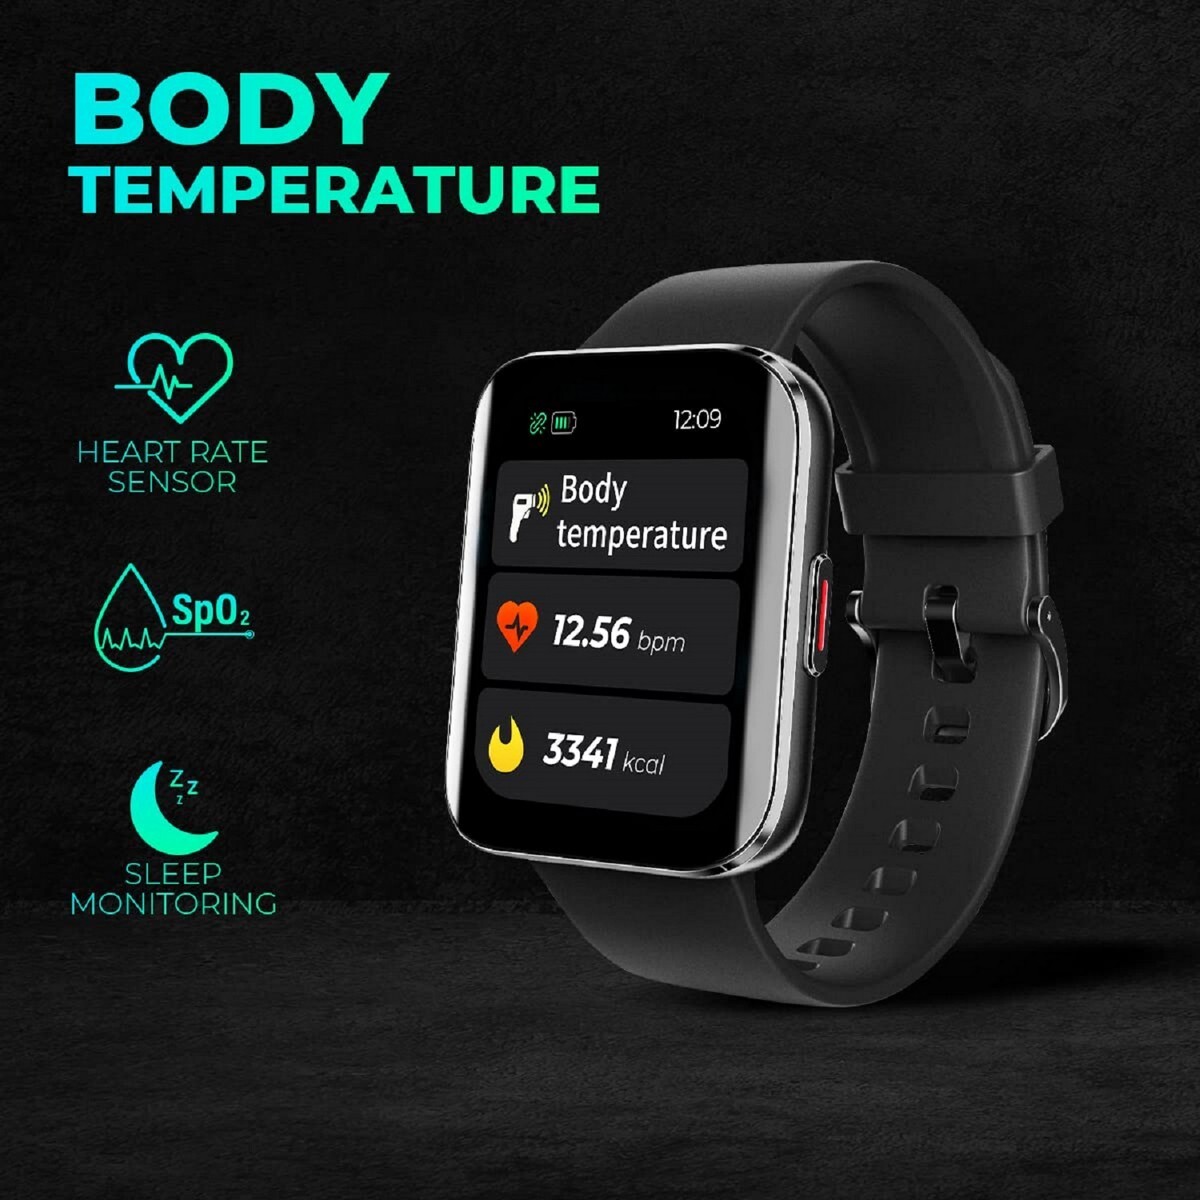 Corseca JUST CORSECA STAYFIT J!VE Smart Watch with Dual Curved Screen and IP67 Water Resistant Black